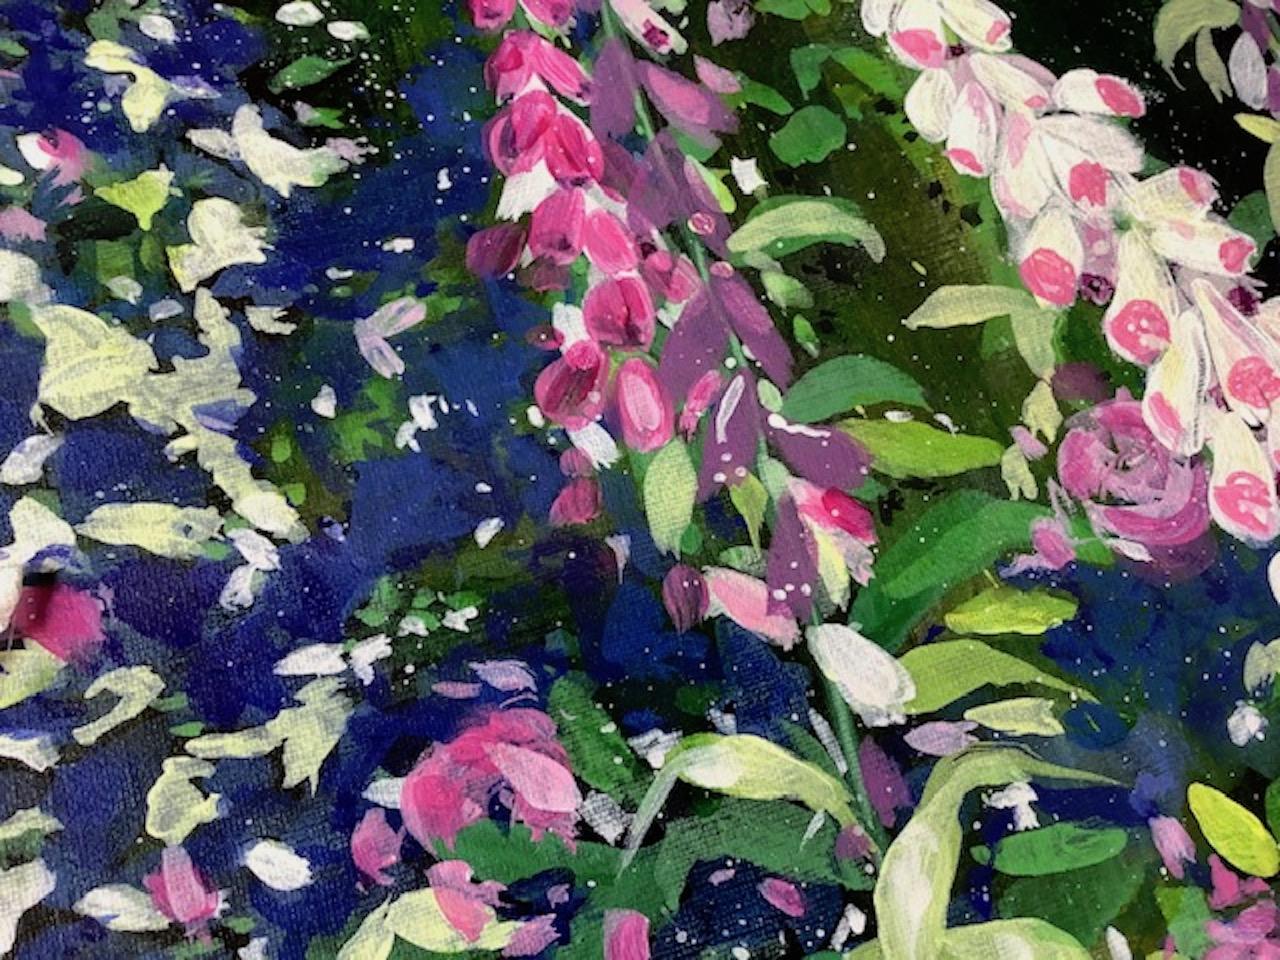 Adele Riley
Foxgloves
Original Nature Painting
Acrylic Paint and Acrylic Inks on Canvas
Image size: H 30cm (12″) x W 40cm (15.75″) x D 2cm (0.8″)
Sold Unframed
Please note that in situ images are purely an indication of how a piece may